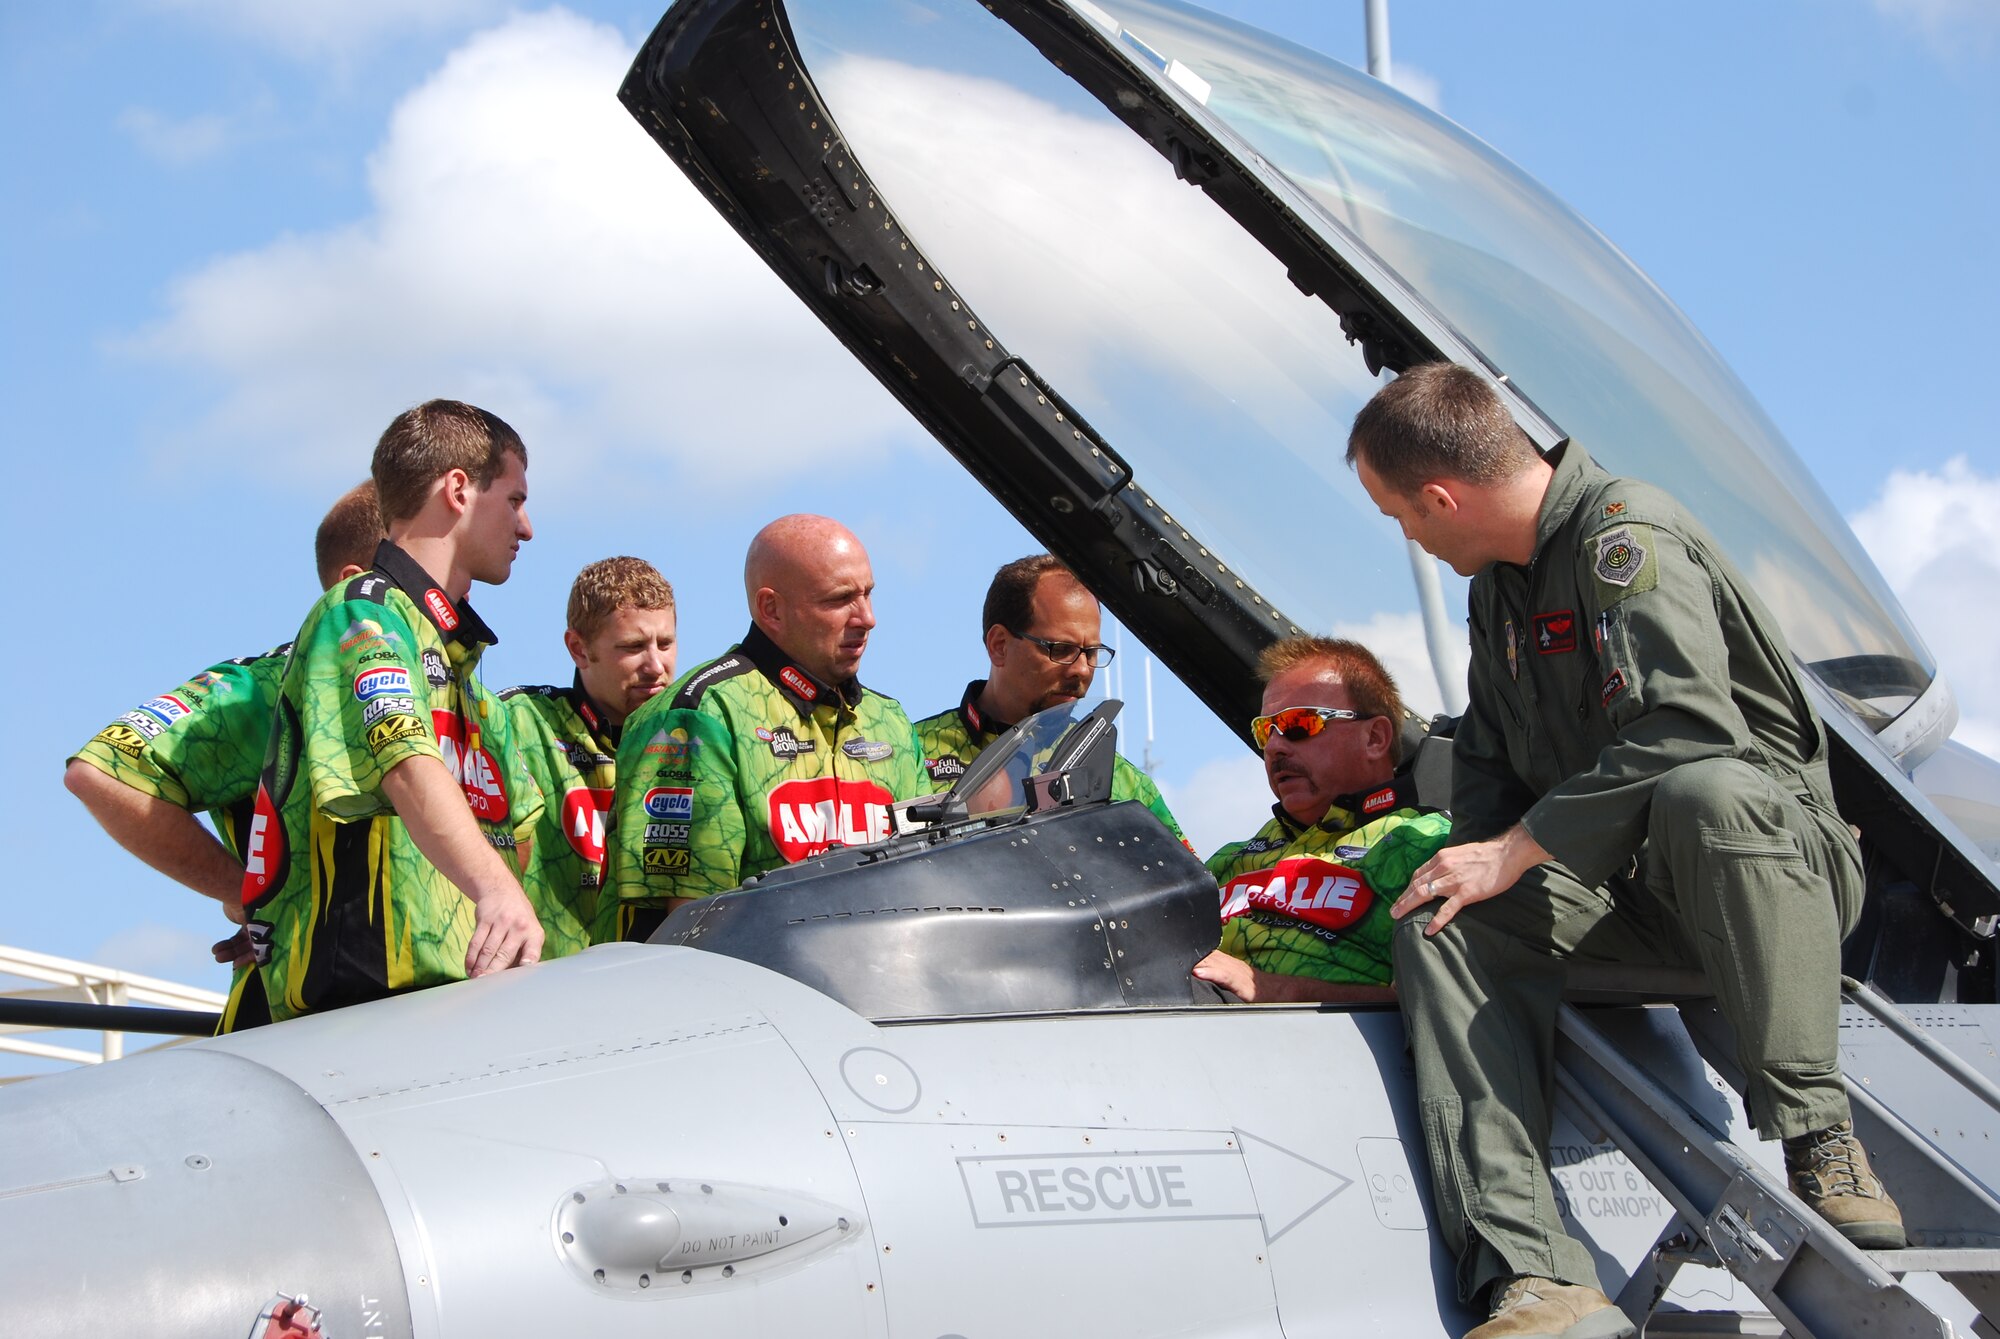 As Mr. Terry McMillen, driver of the Amalie Oil Top Fuel dragster, sits in the seat of the F-16, Maj. Michael Barron, right, pilot with the 457th Fighter Squadron, discusses the differences and similarities between the instrumentation of the jet and the racer. McMillen and his crew recently visited the 301st Fighter Wing before racing at a Dallas-area event. (Air Force Photo/Tech. Sgt. Shawn McCowan)